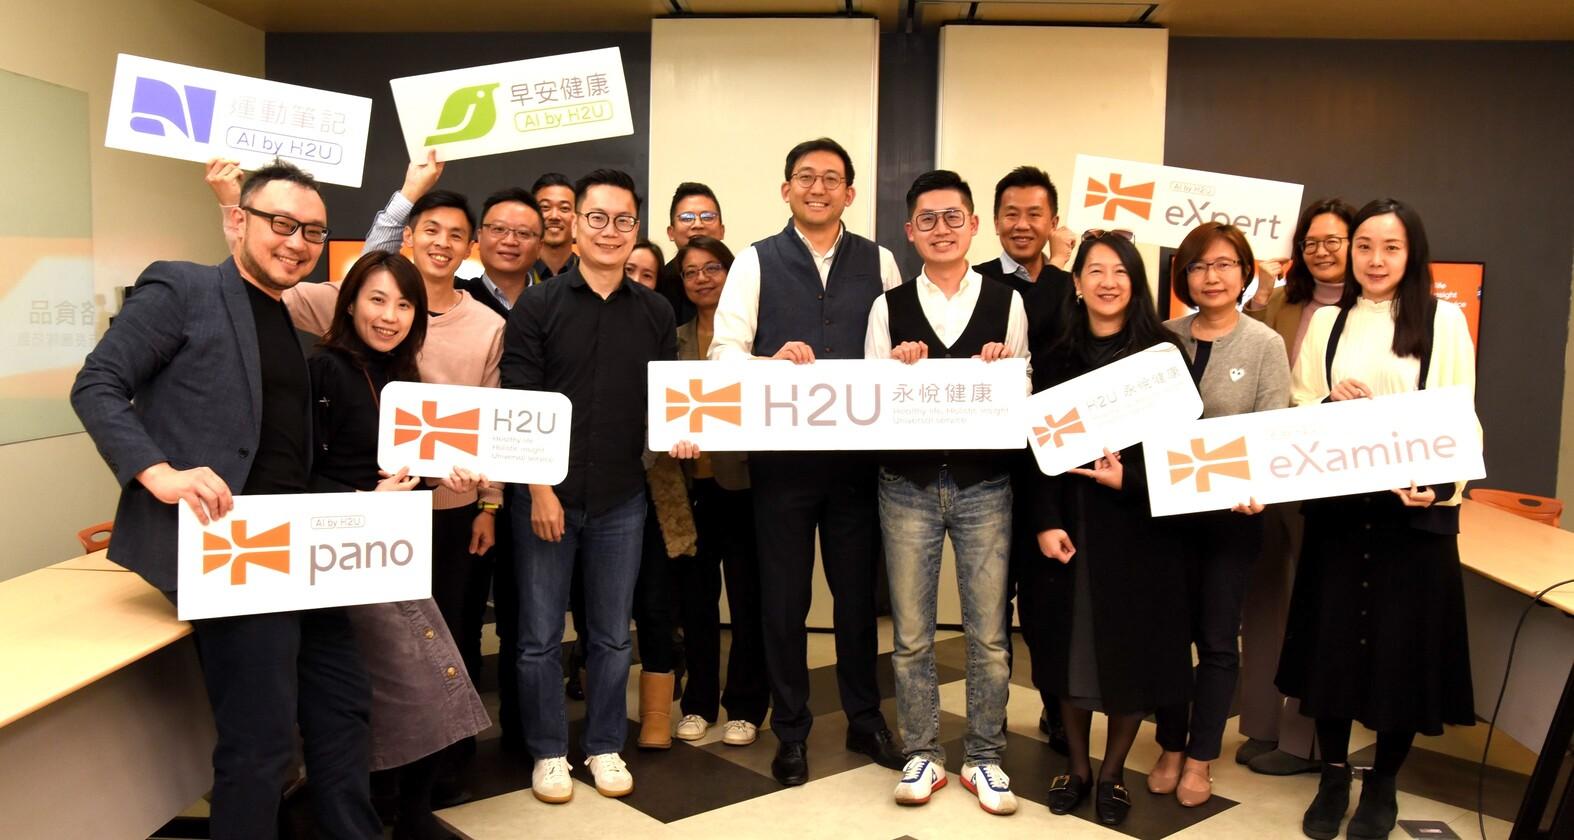 After a successful Series B fundraising round involving contributions from Korea’s medical testing laboratory Seoul Clinical Laboratories (SCL), Taiwan’s food giant Standard Foods, the prominent protein and antibody brand Leadgene Biomedical, and AWS cloud services representative GrandTech C.G. Systems, H2U secured over 10 million USD in funds.